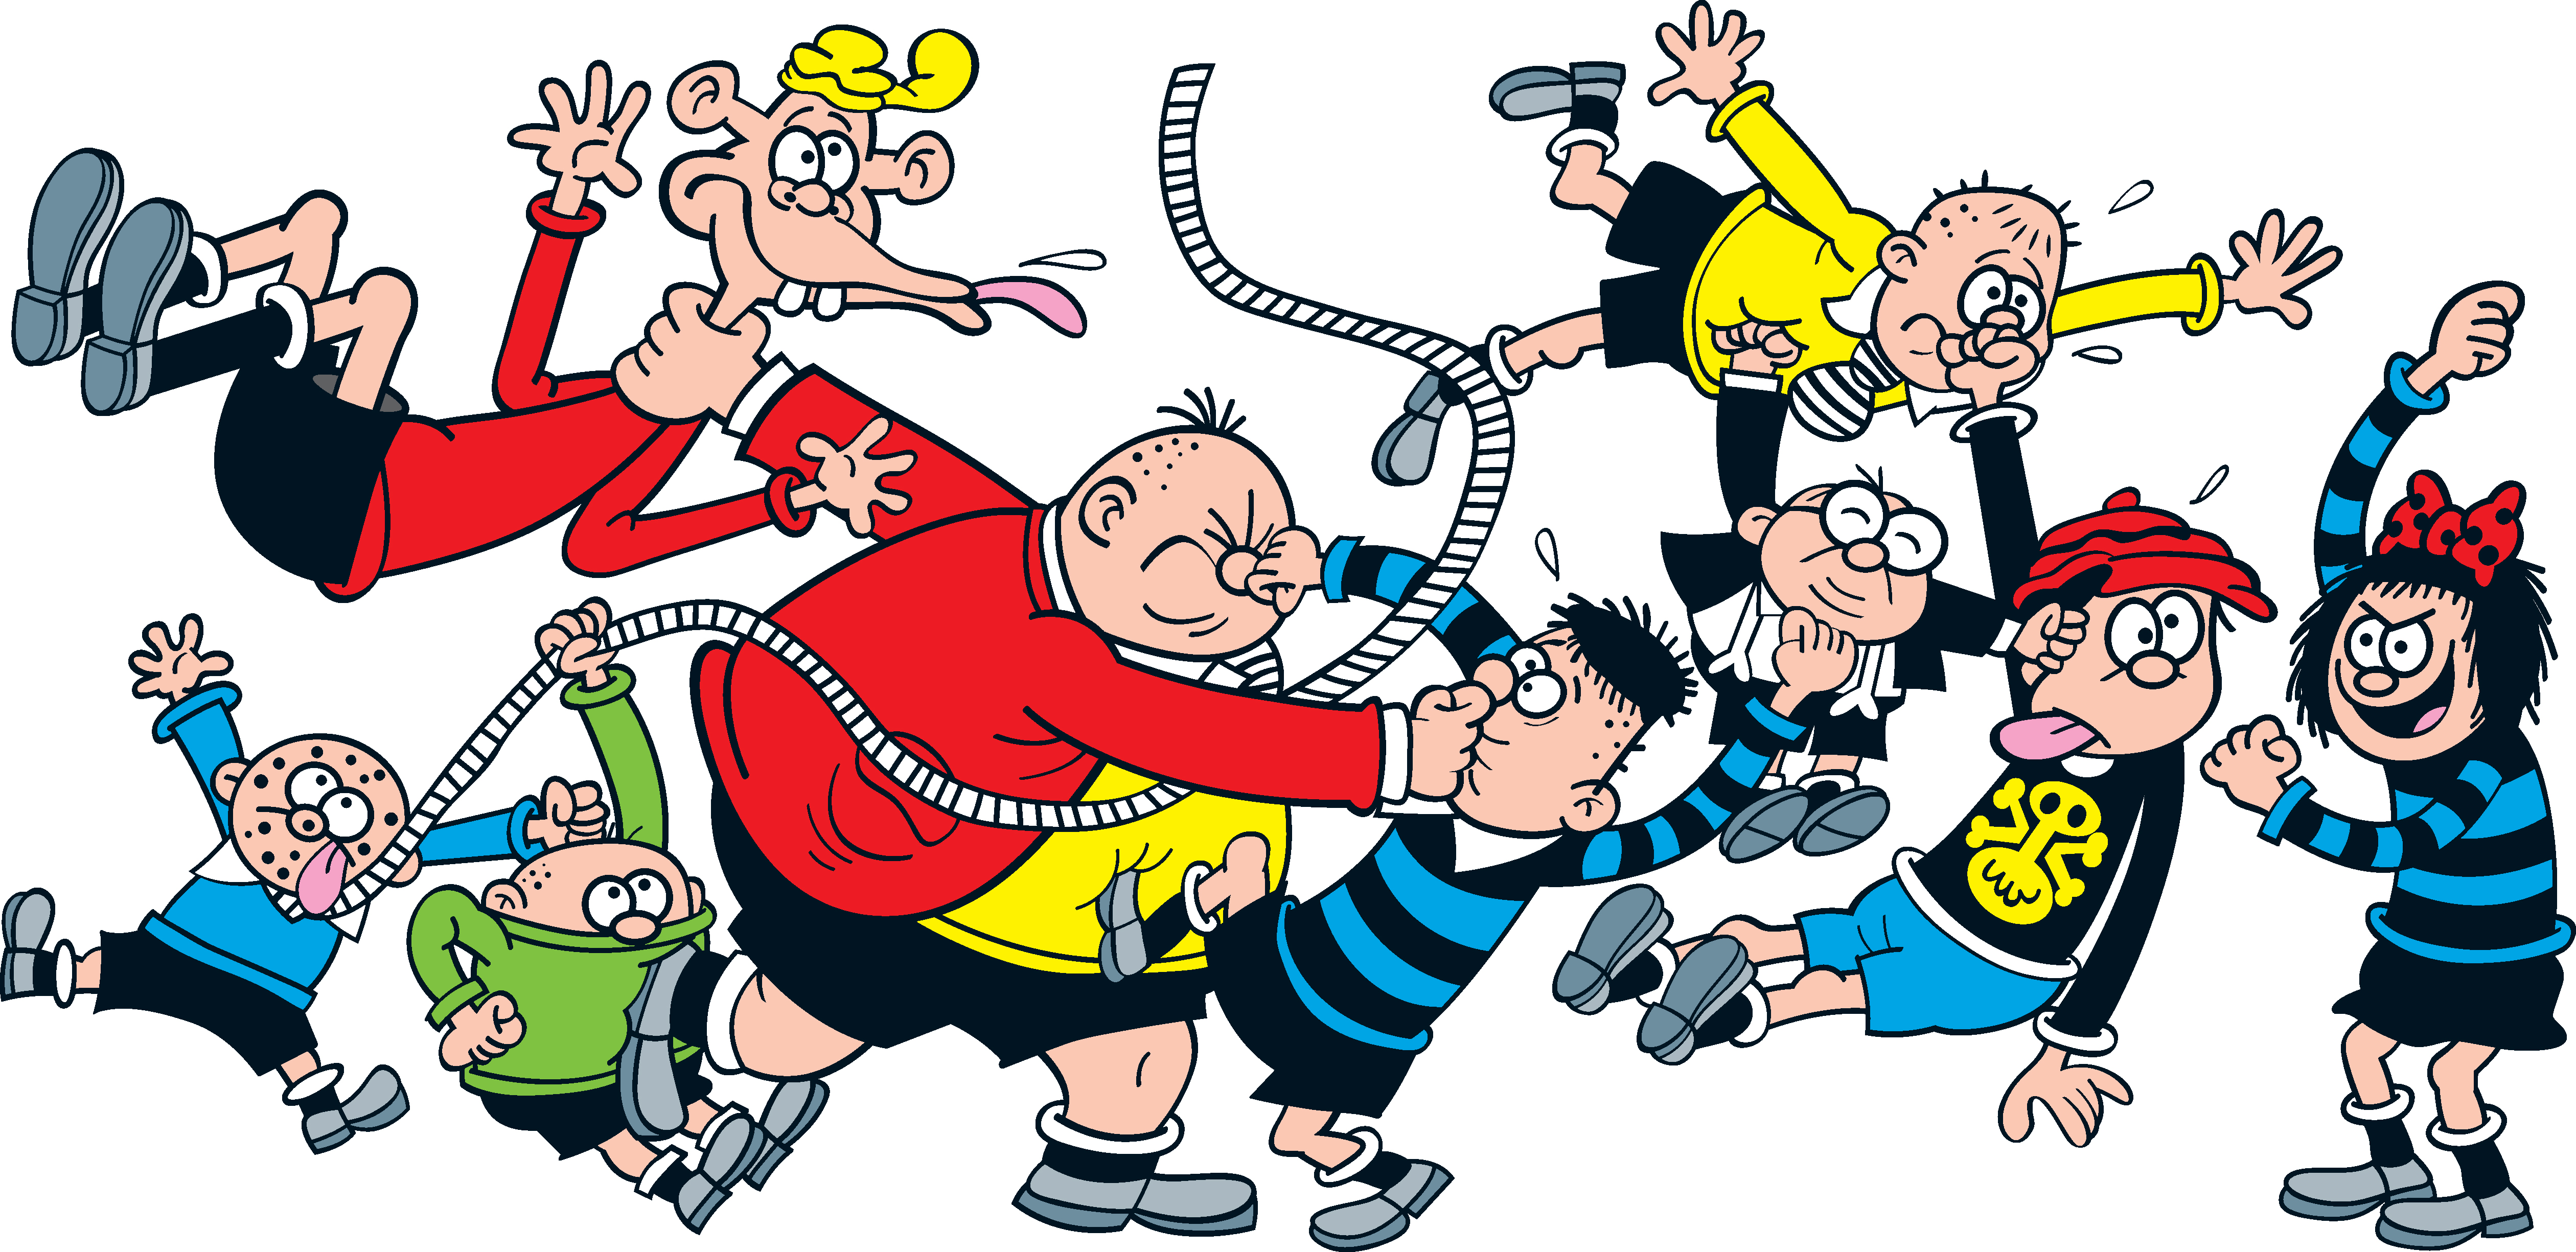 The Bash Street Kids in a classic rough and tumble tussle